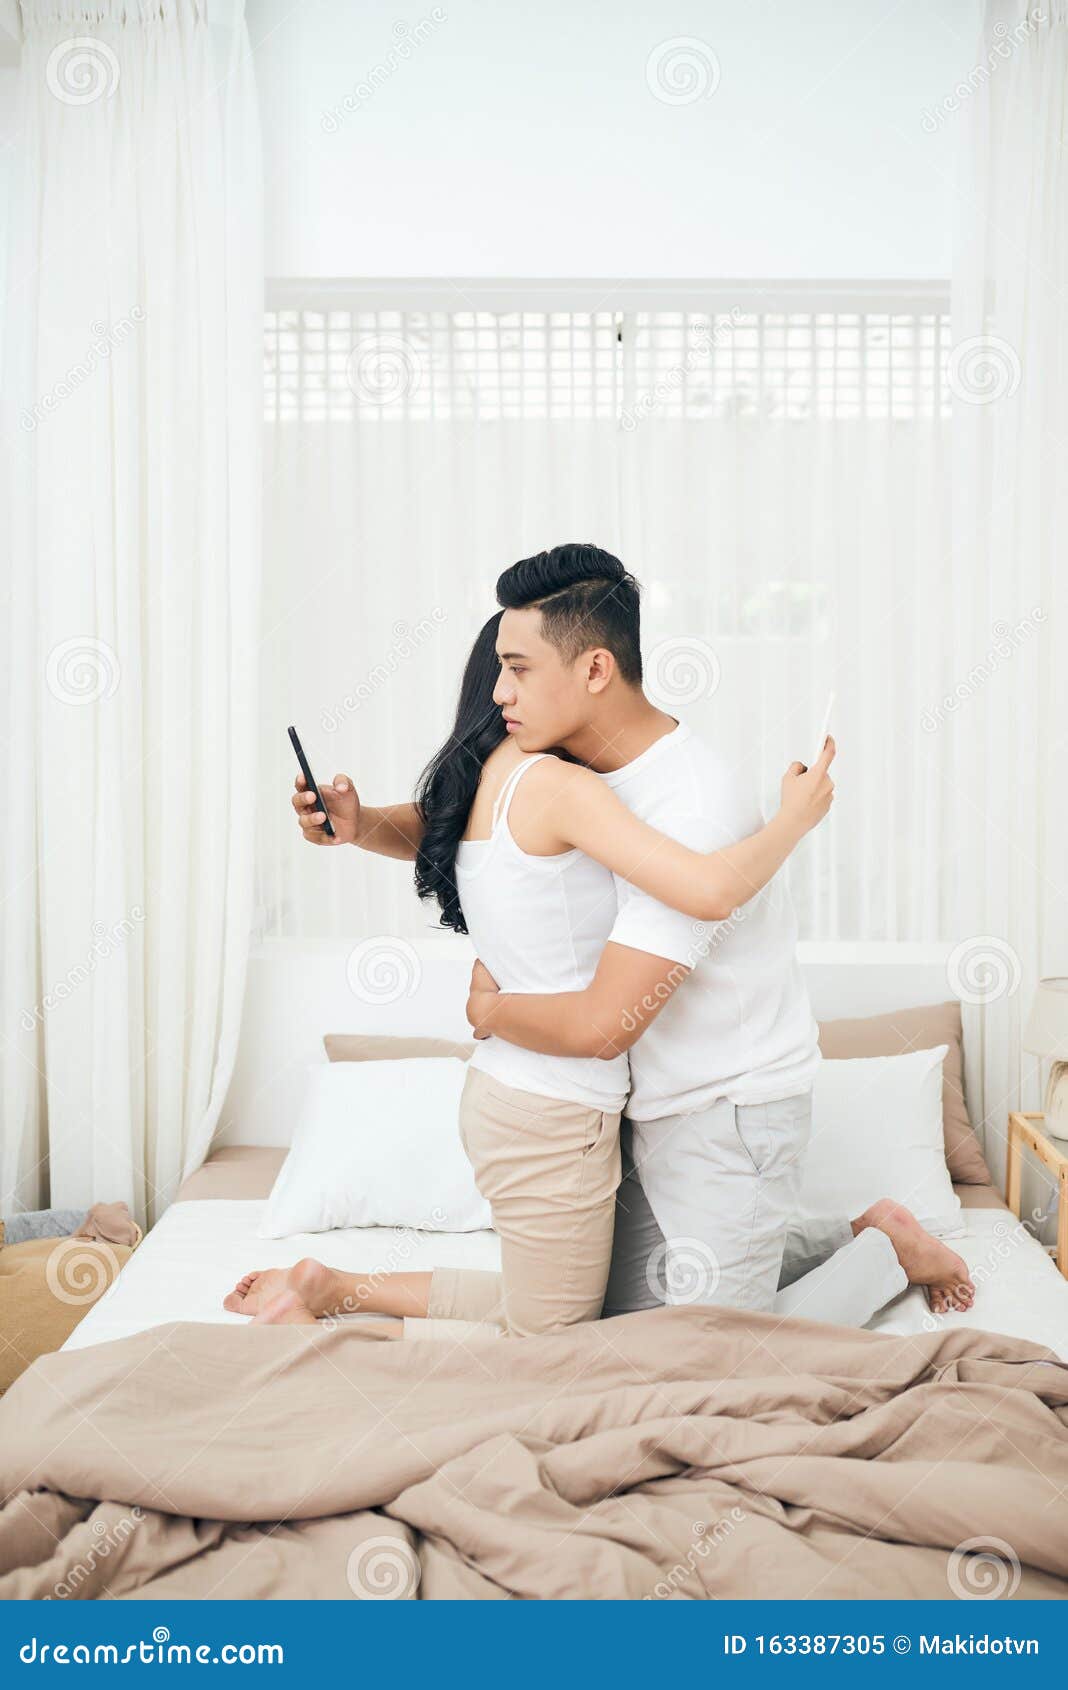 cheating while wife room